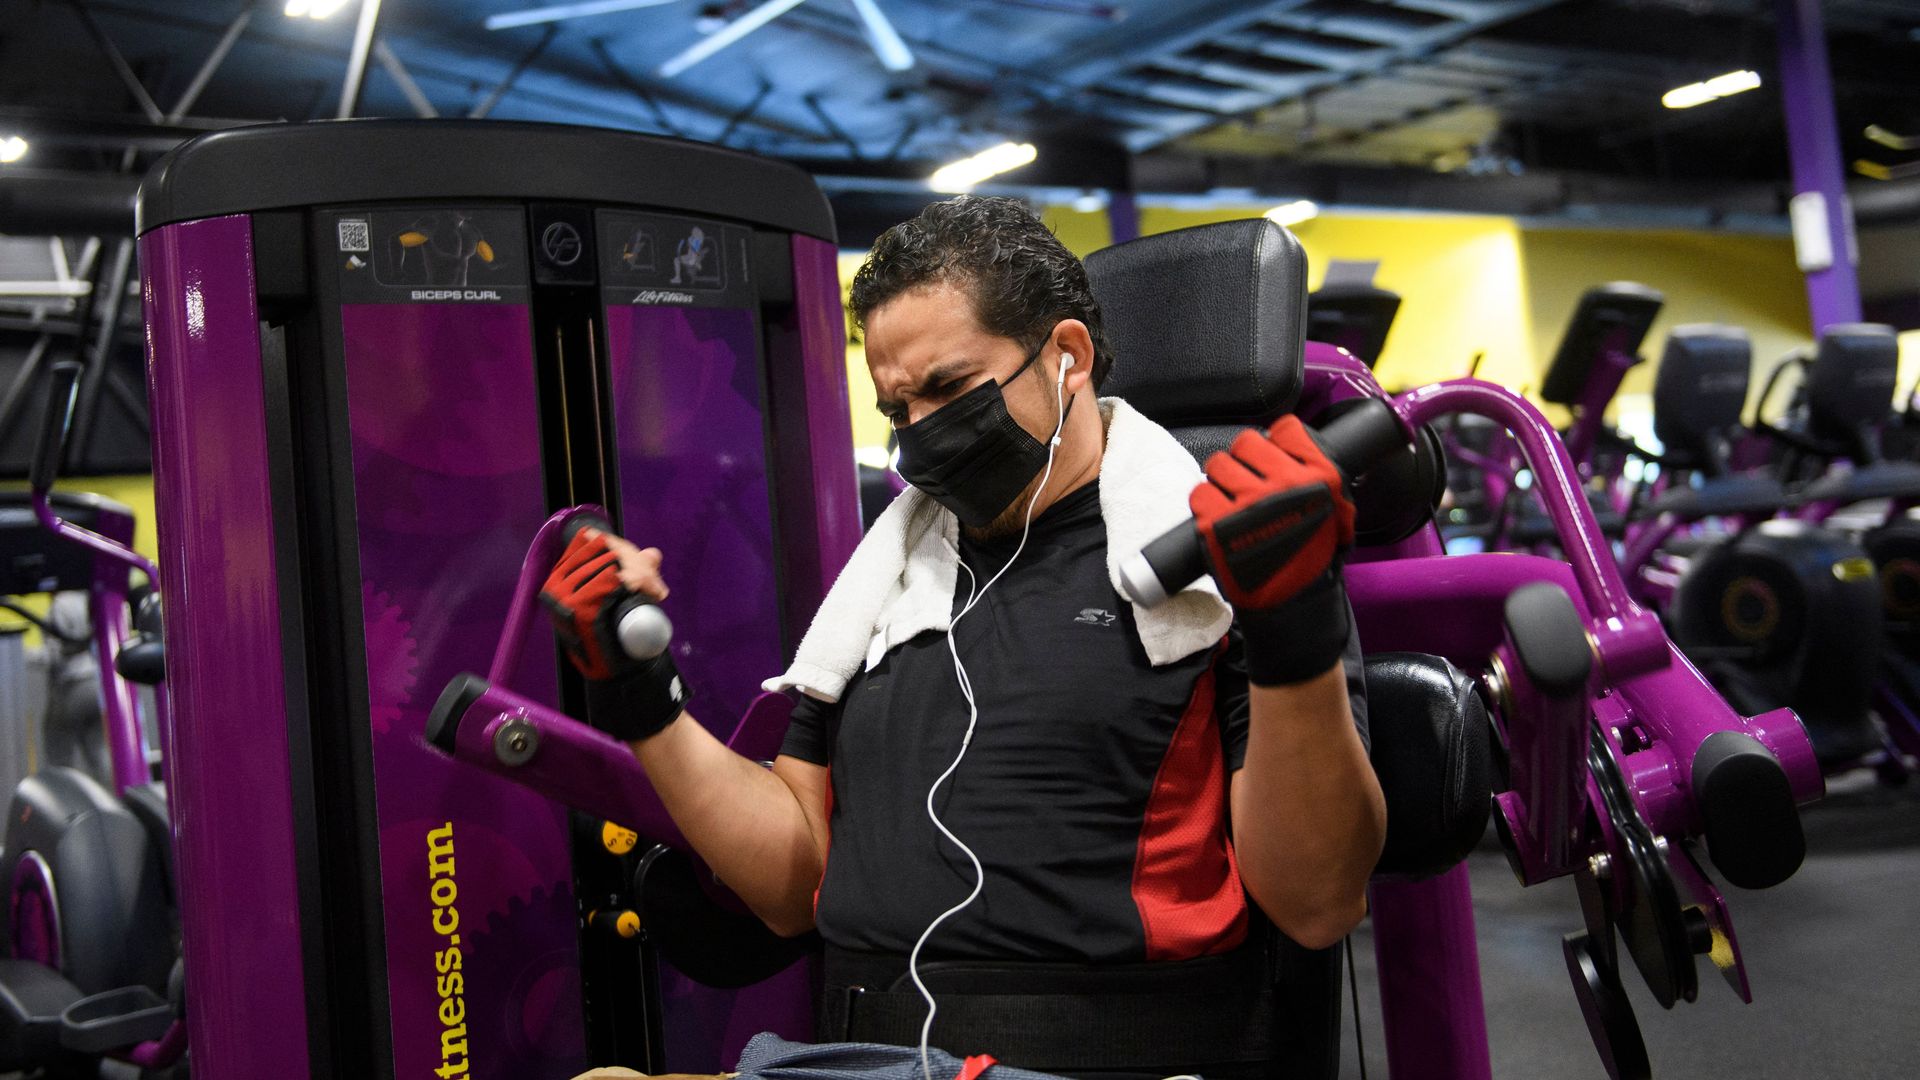 Man wears a face mask while using a weight machine inside a Planet Fitness gym.